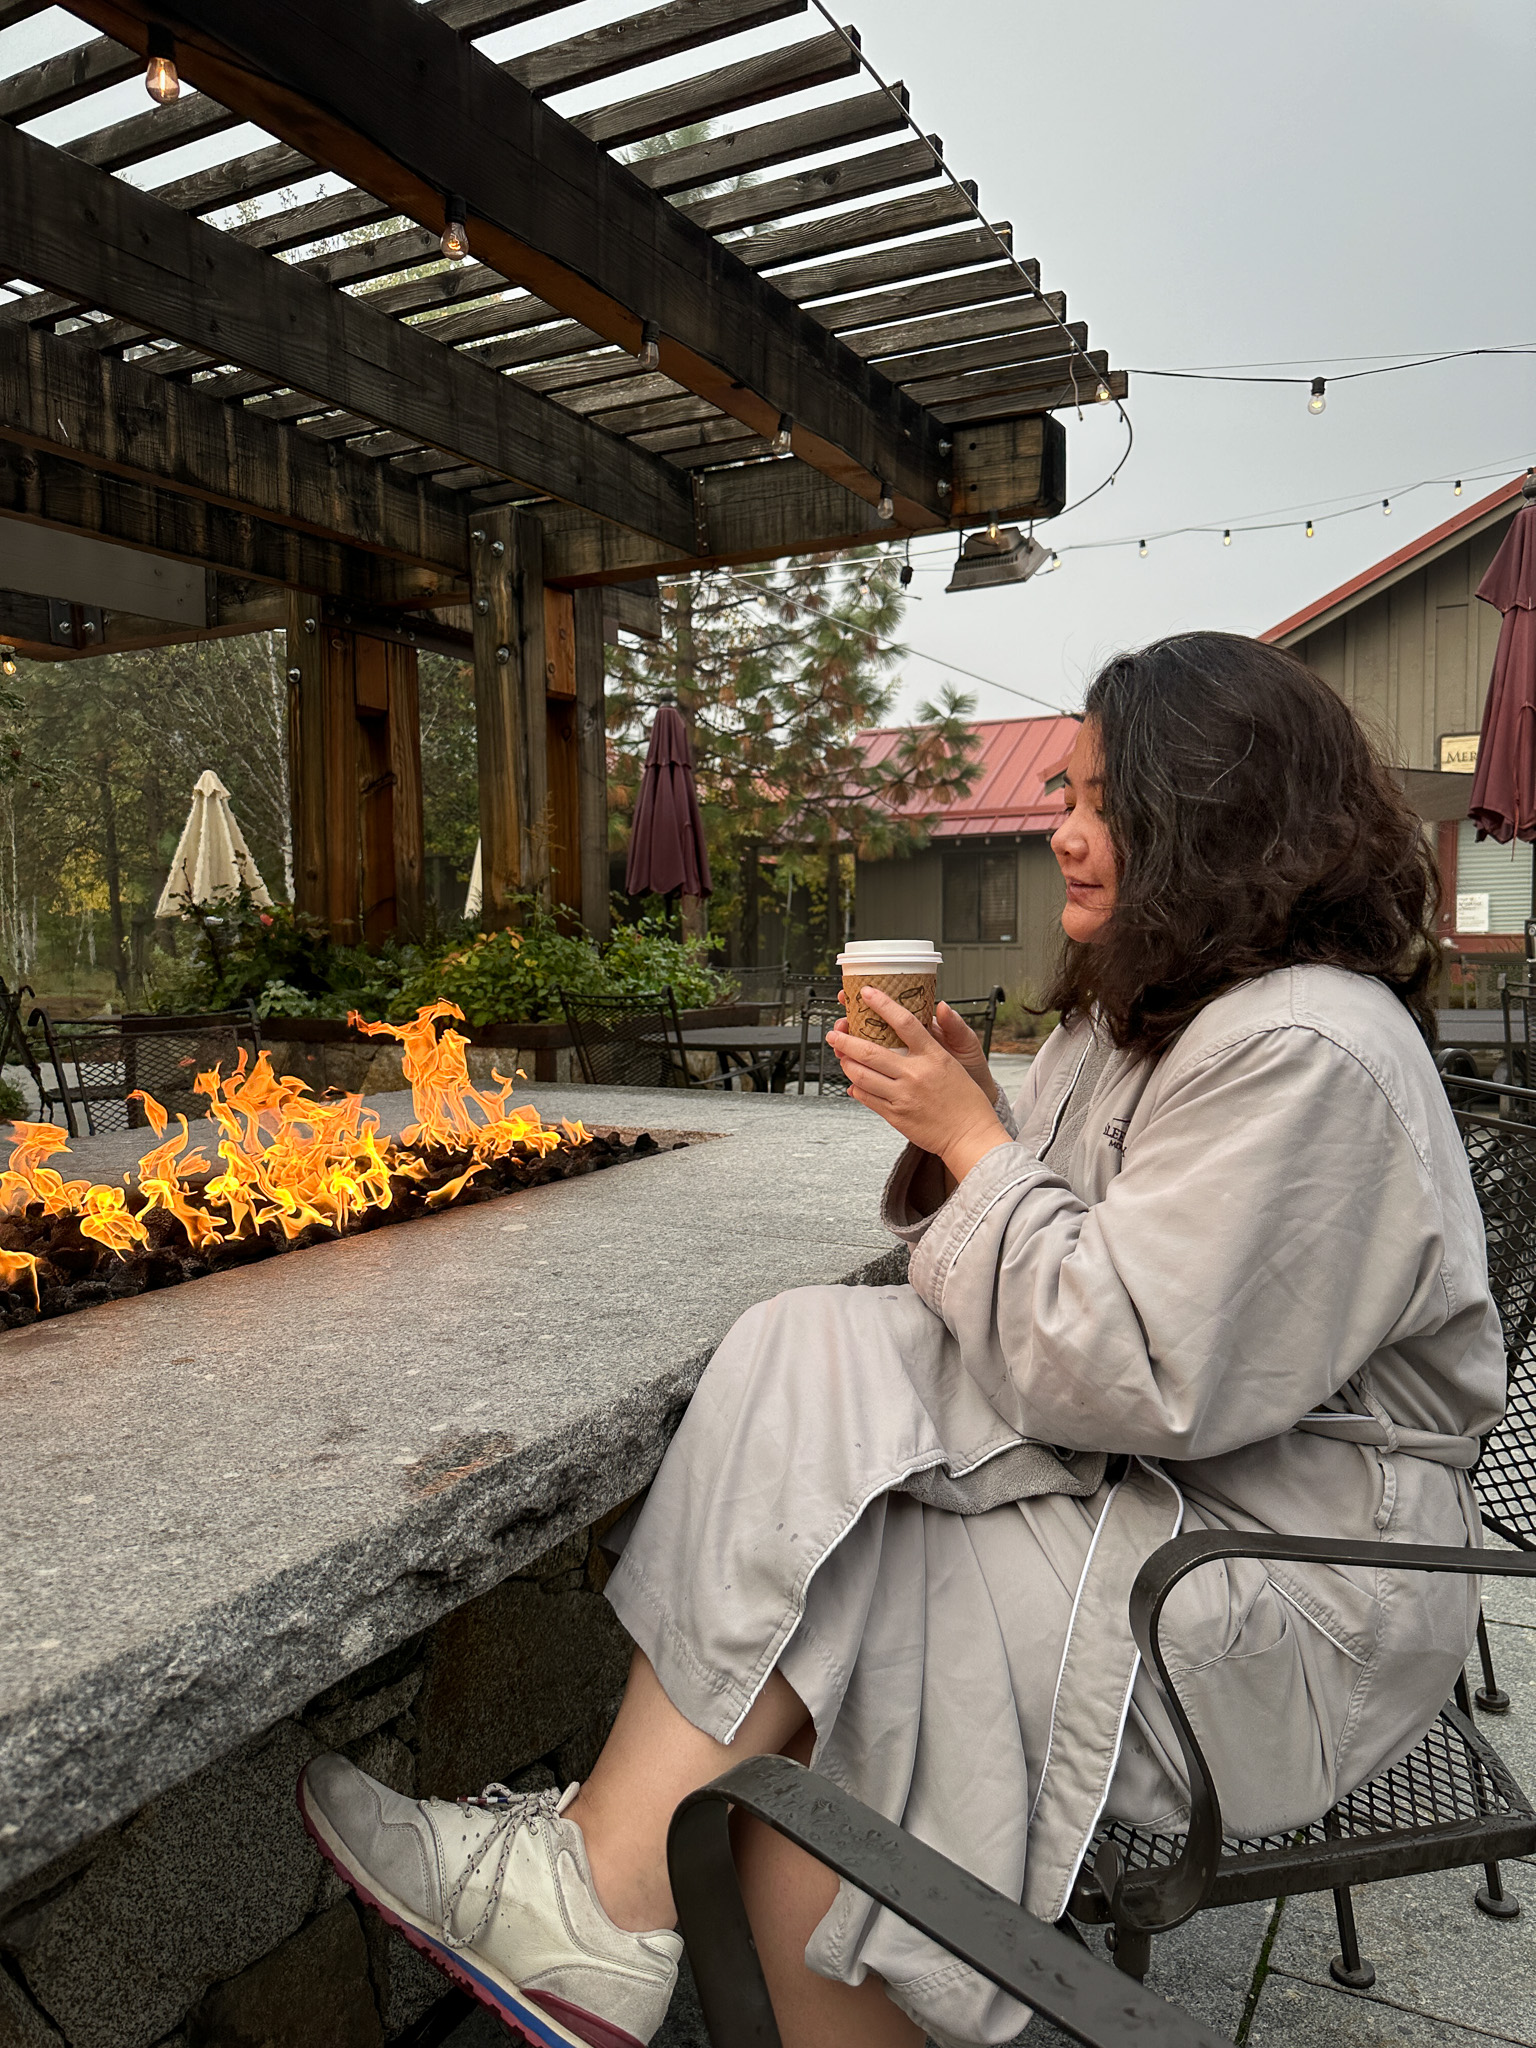 sleeping lady resort relaxing next to fire pit wearing a robe leavenworth